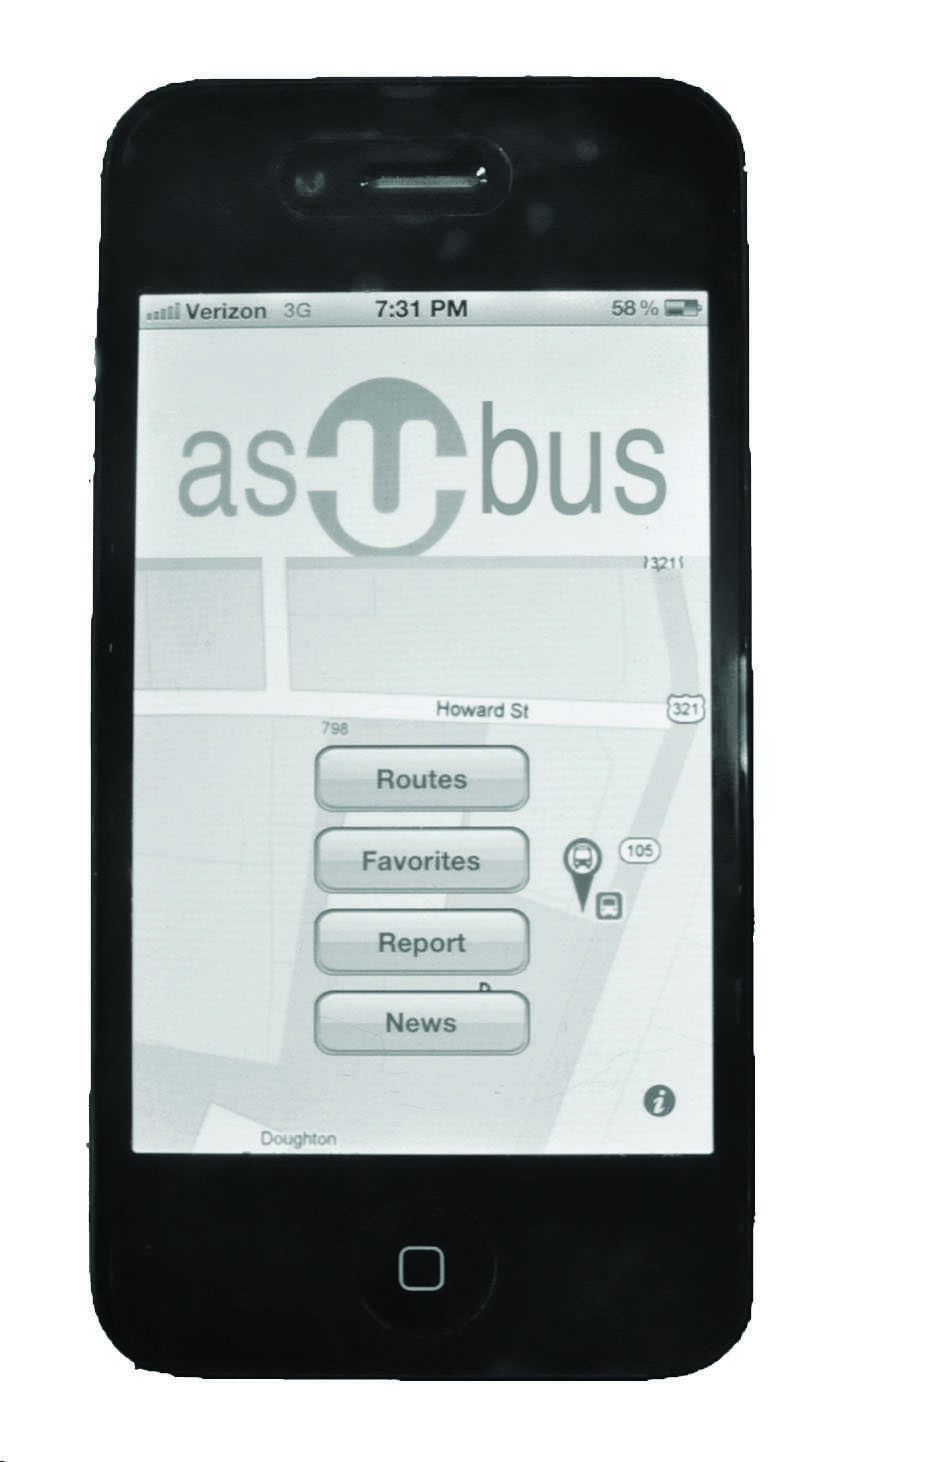 The AsUBus smartphone app was created by sophomore computer science major Brian Clee. The app, which allows students to conveniently access AppalCart information, has already achieved over 500 downloads.